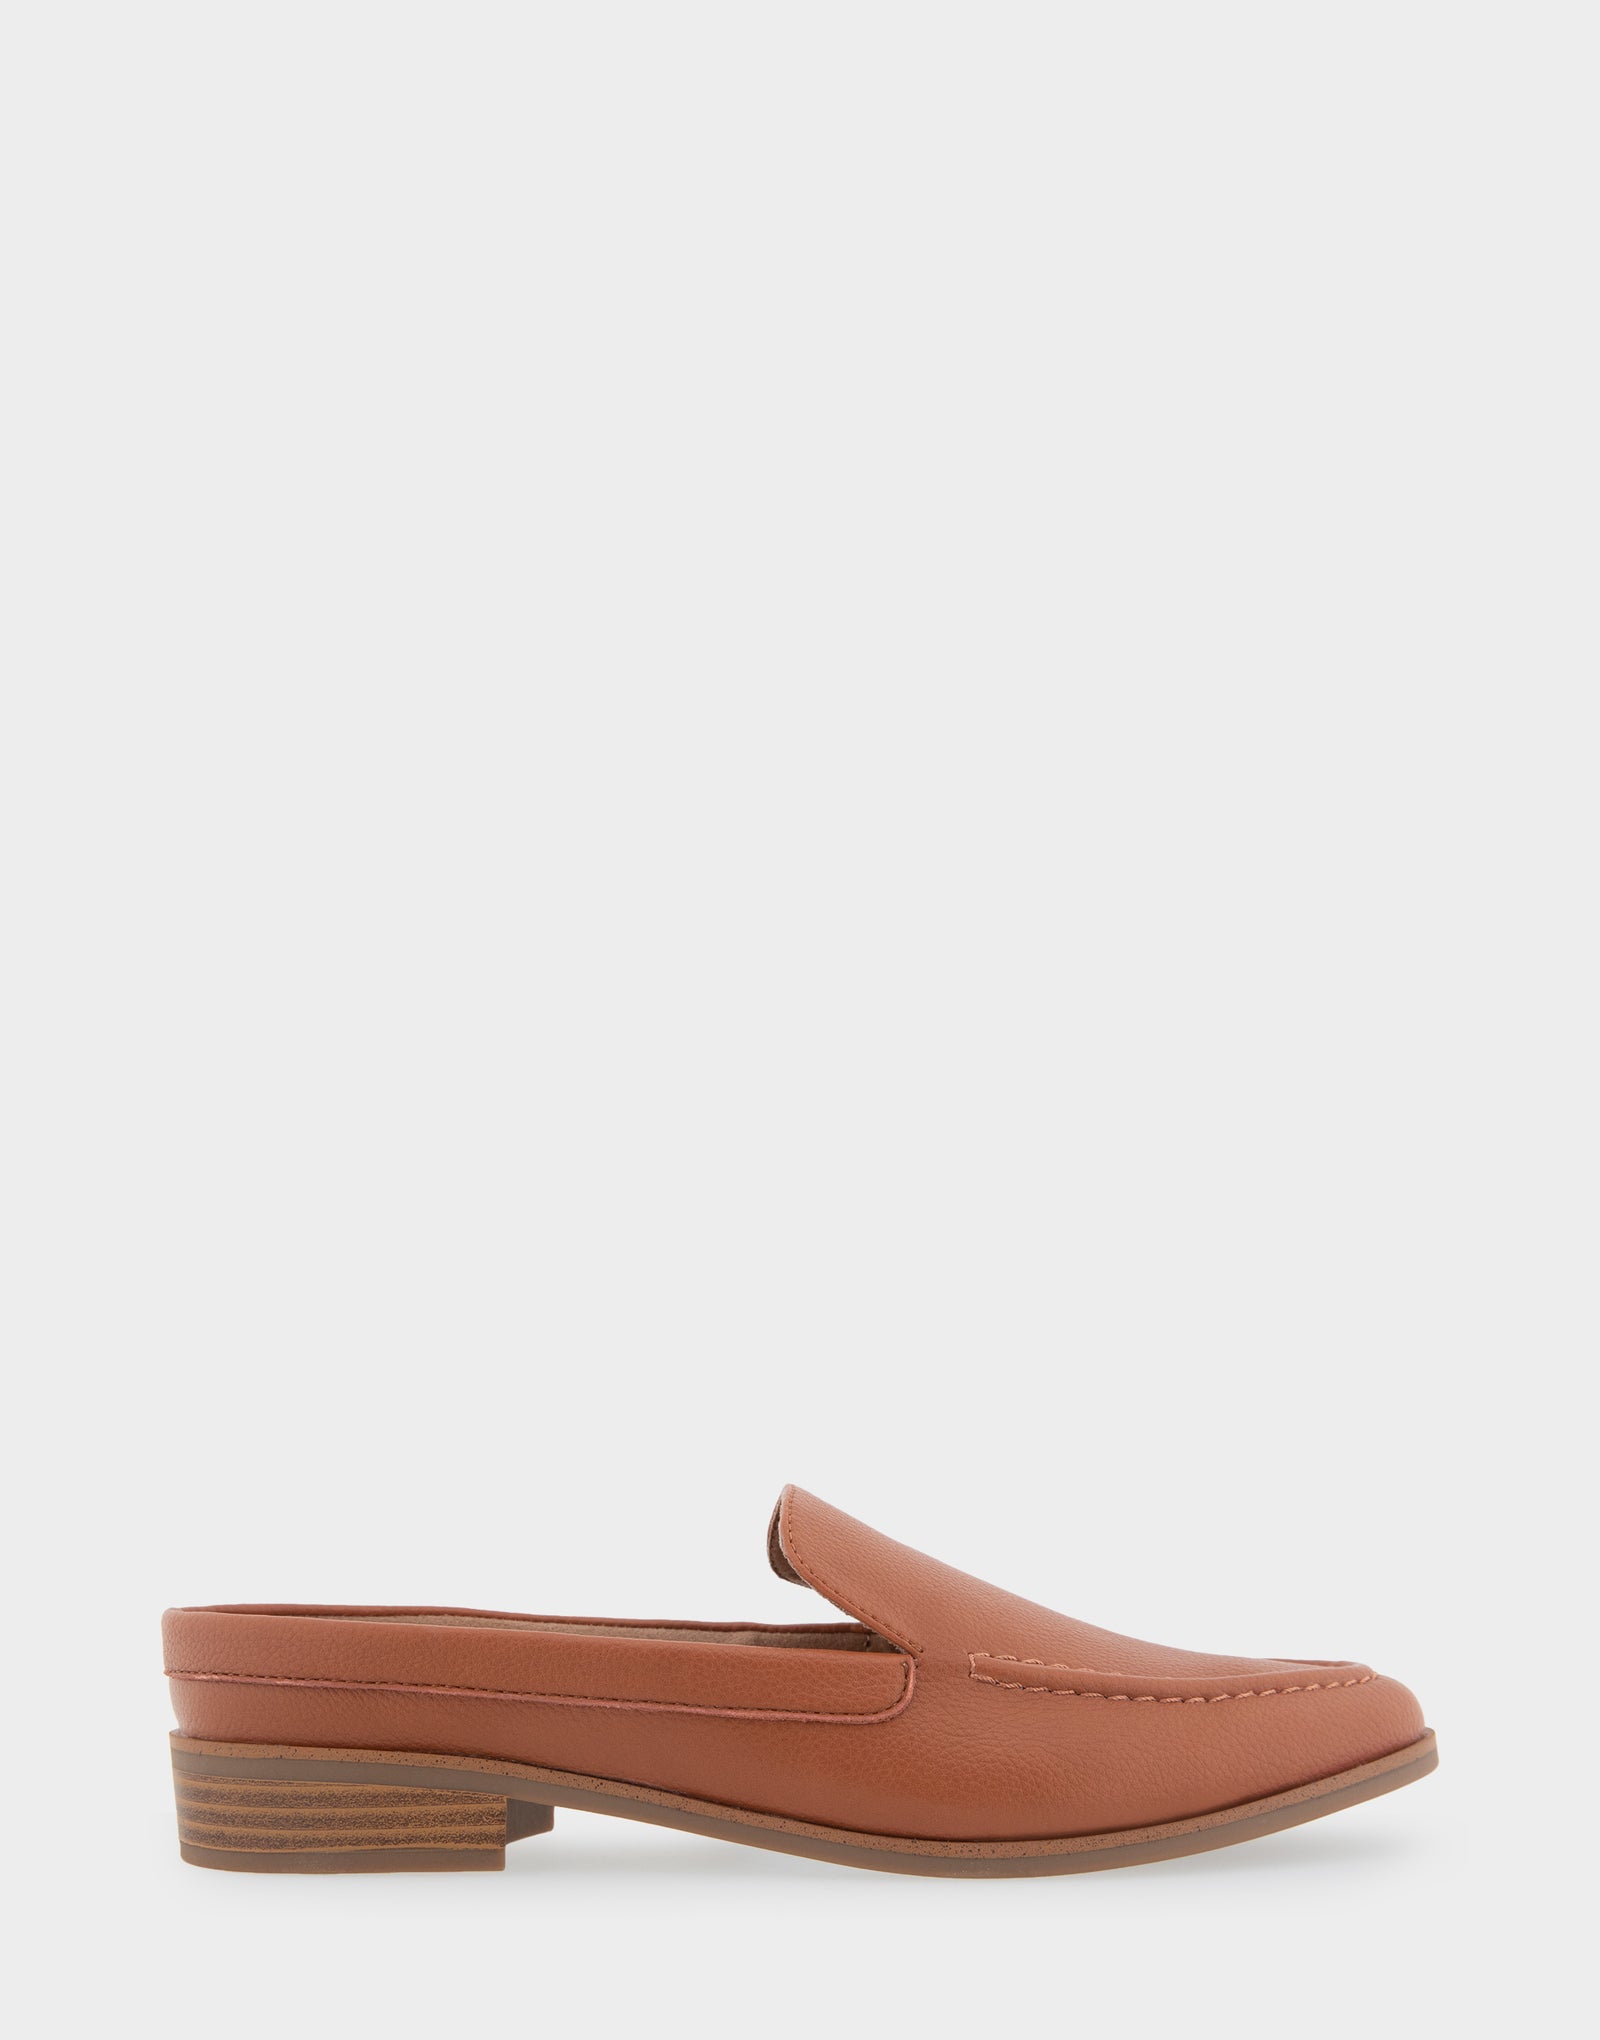 Women's Backless Slip On Loafer in Tan Faux Leather